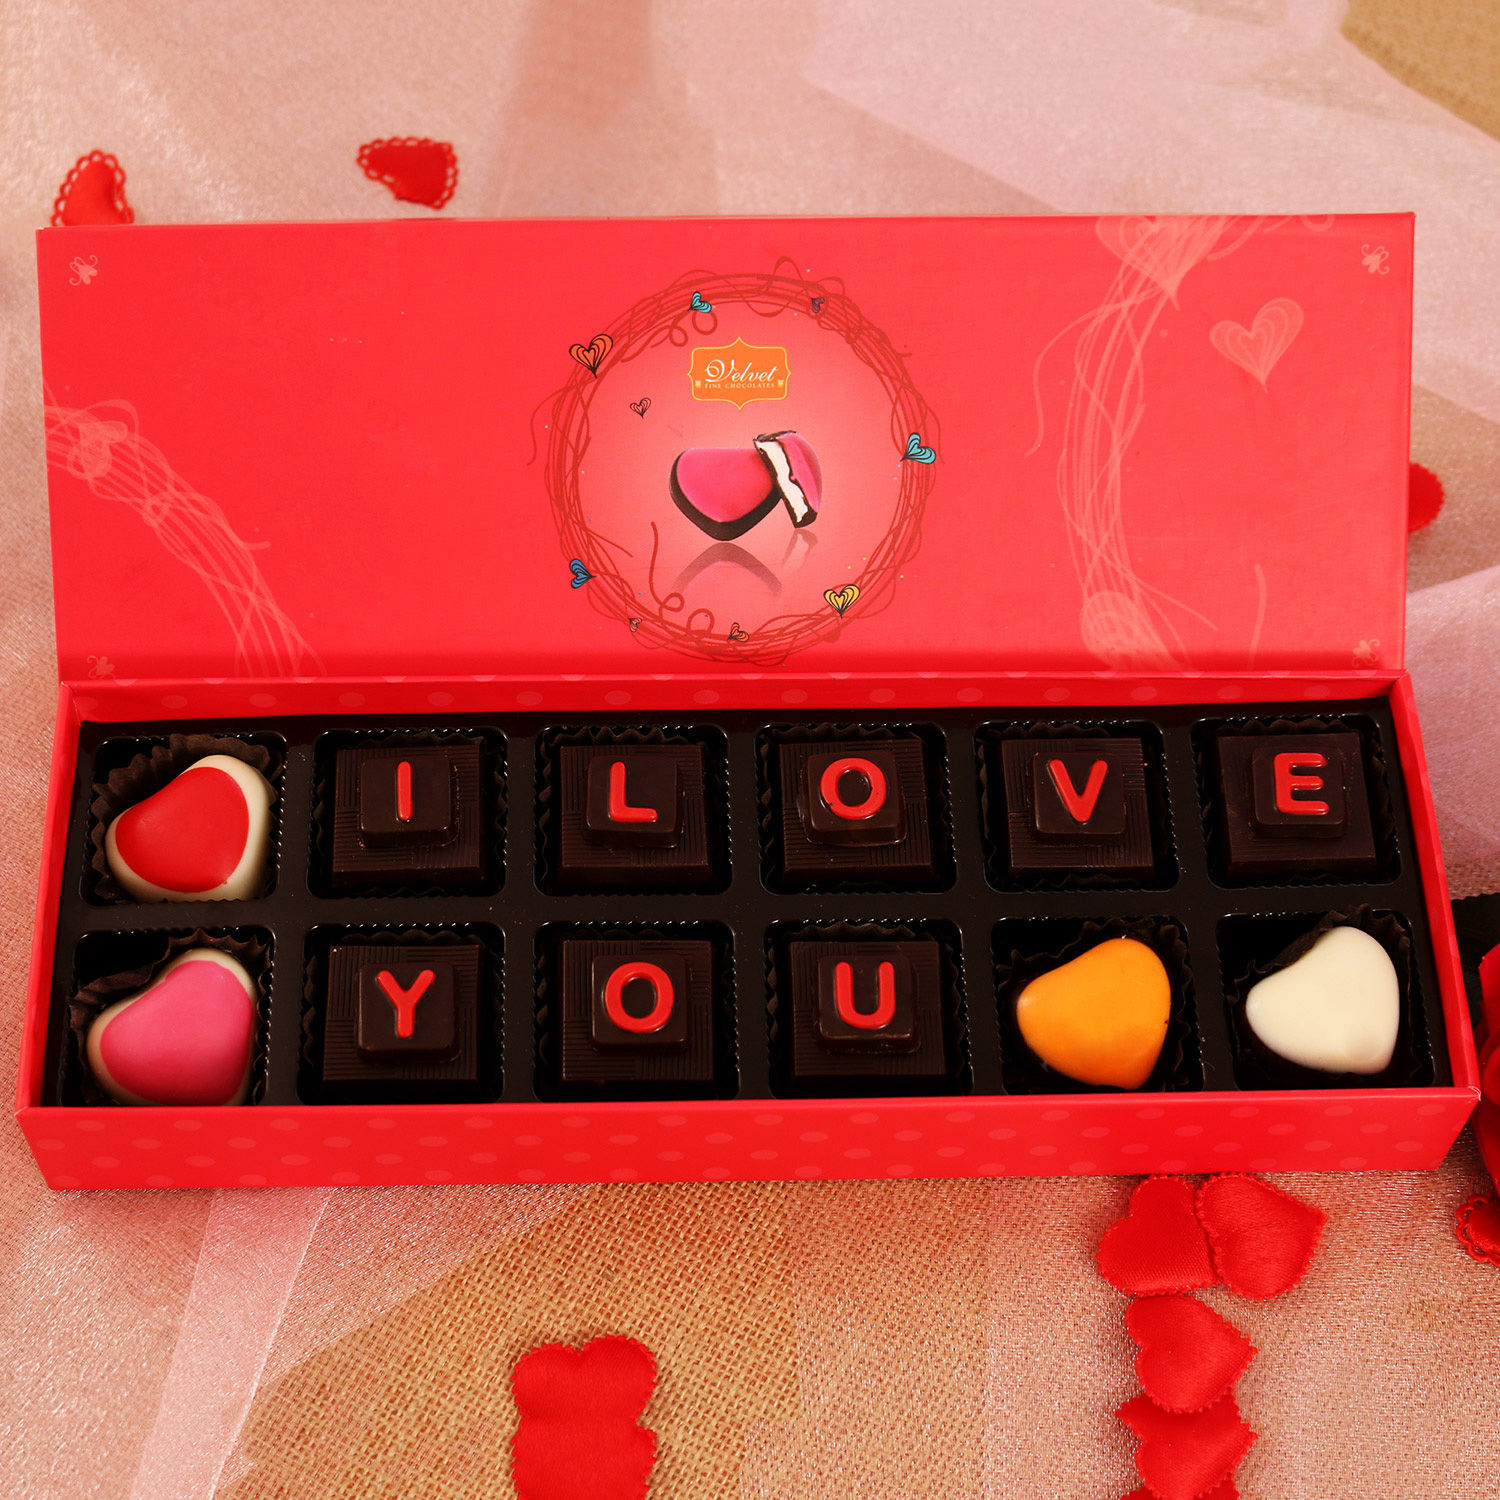 for iphone instal Romance with Chocolate - Hidden Items free